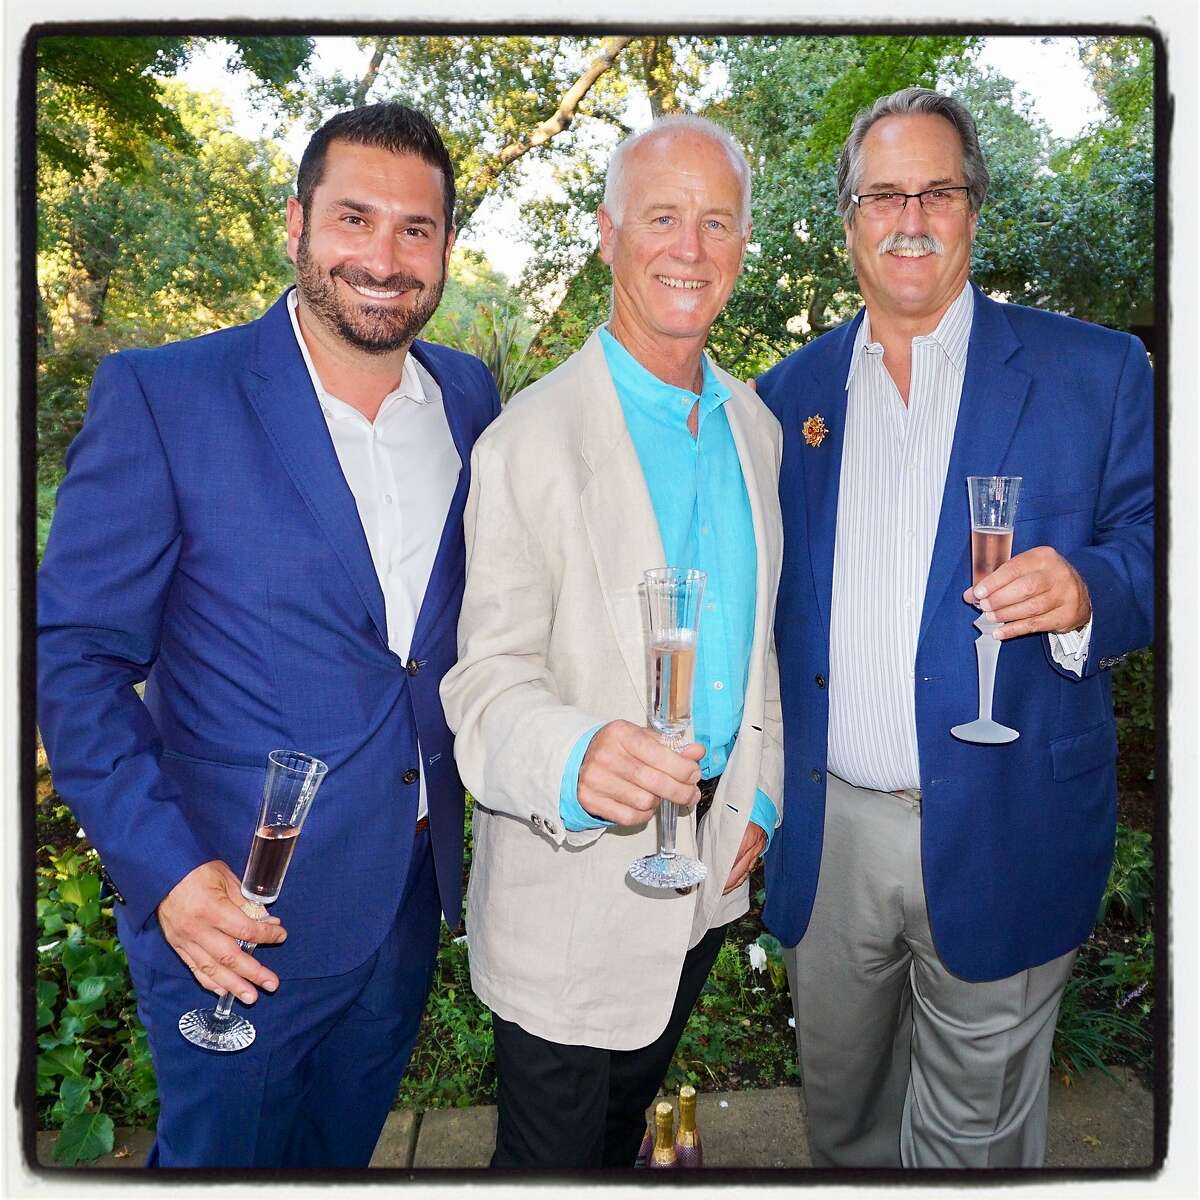 Adam Dornsbusch (left) with vintners Bo Barrett and Cyril Chappellet at the Rubin Singer fashion event. Aug. 2, 2017.